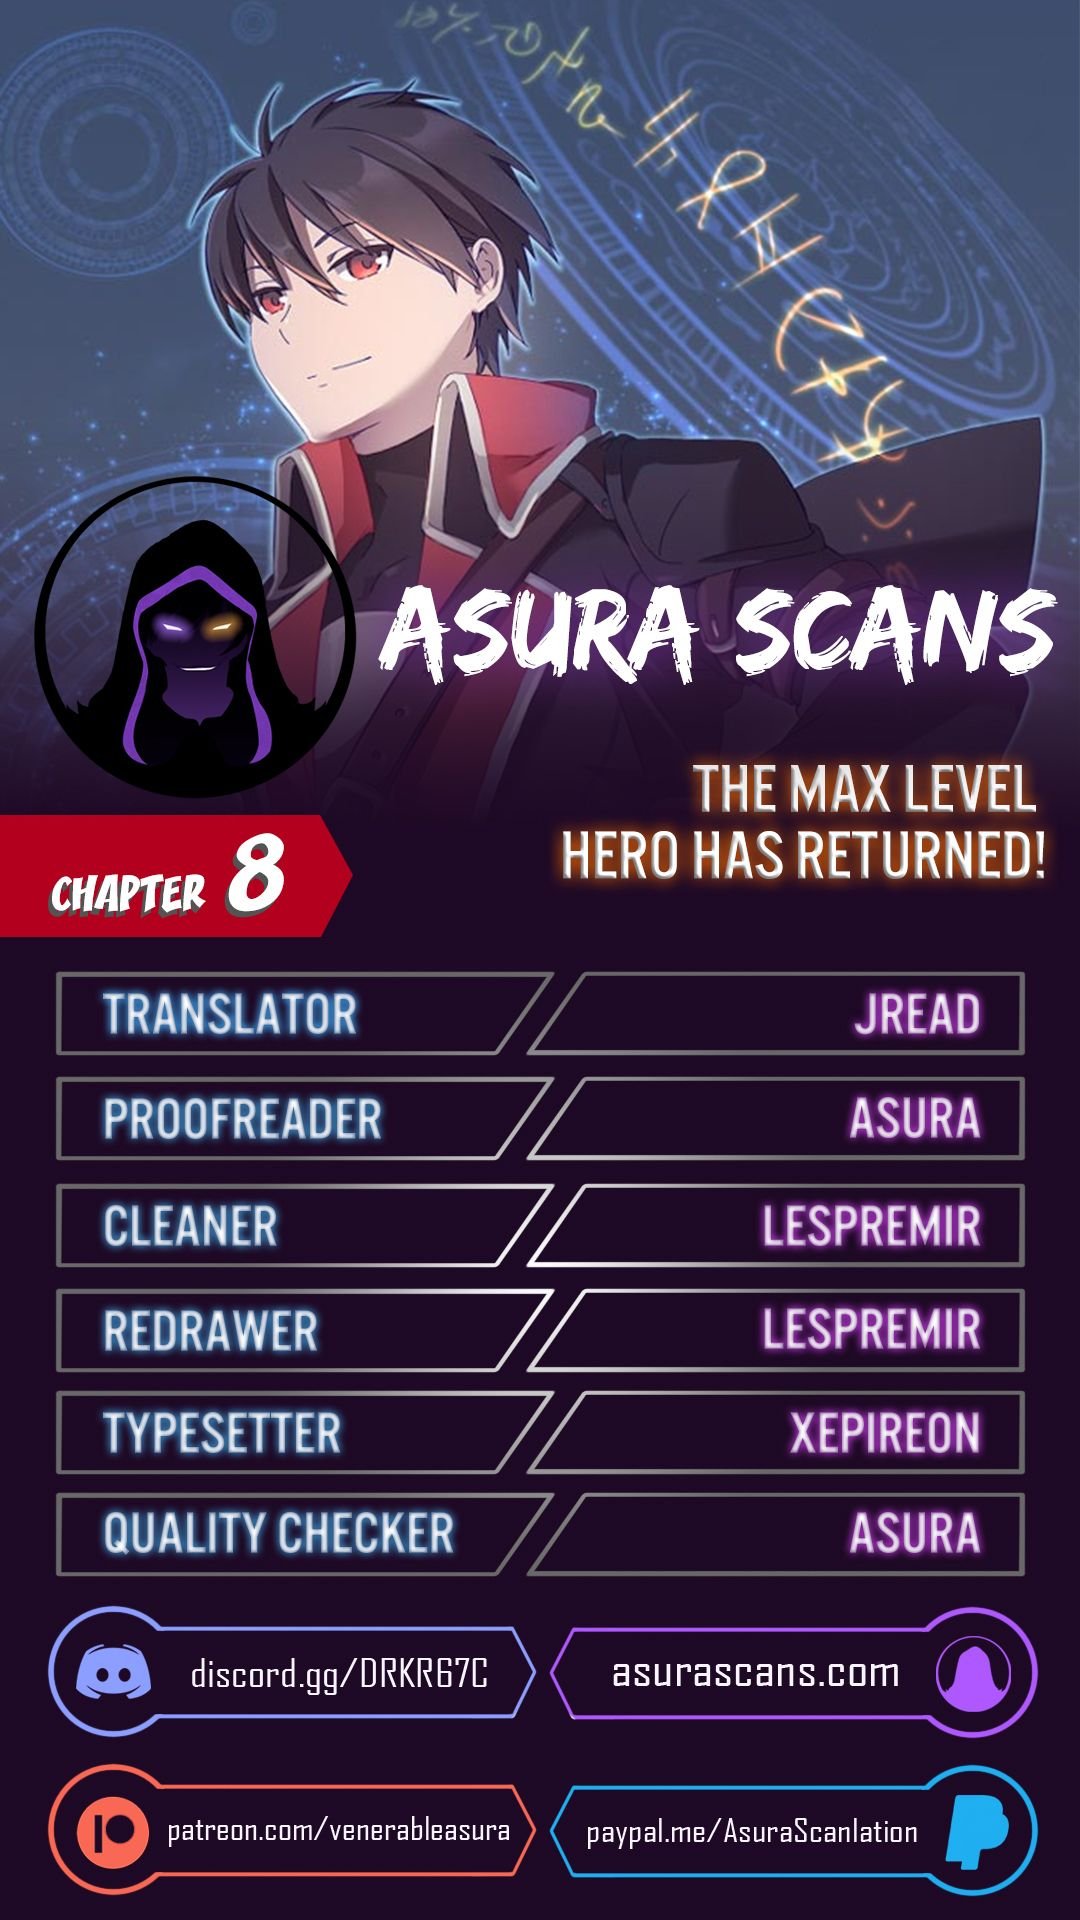 The MAX leveled hero will return! Chapter 8